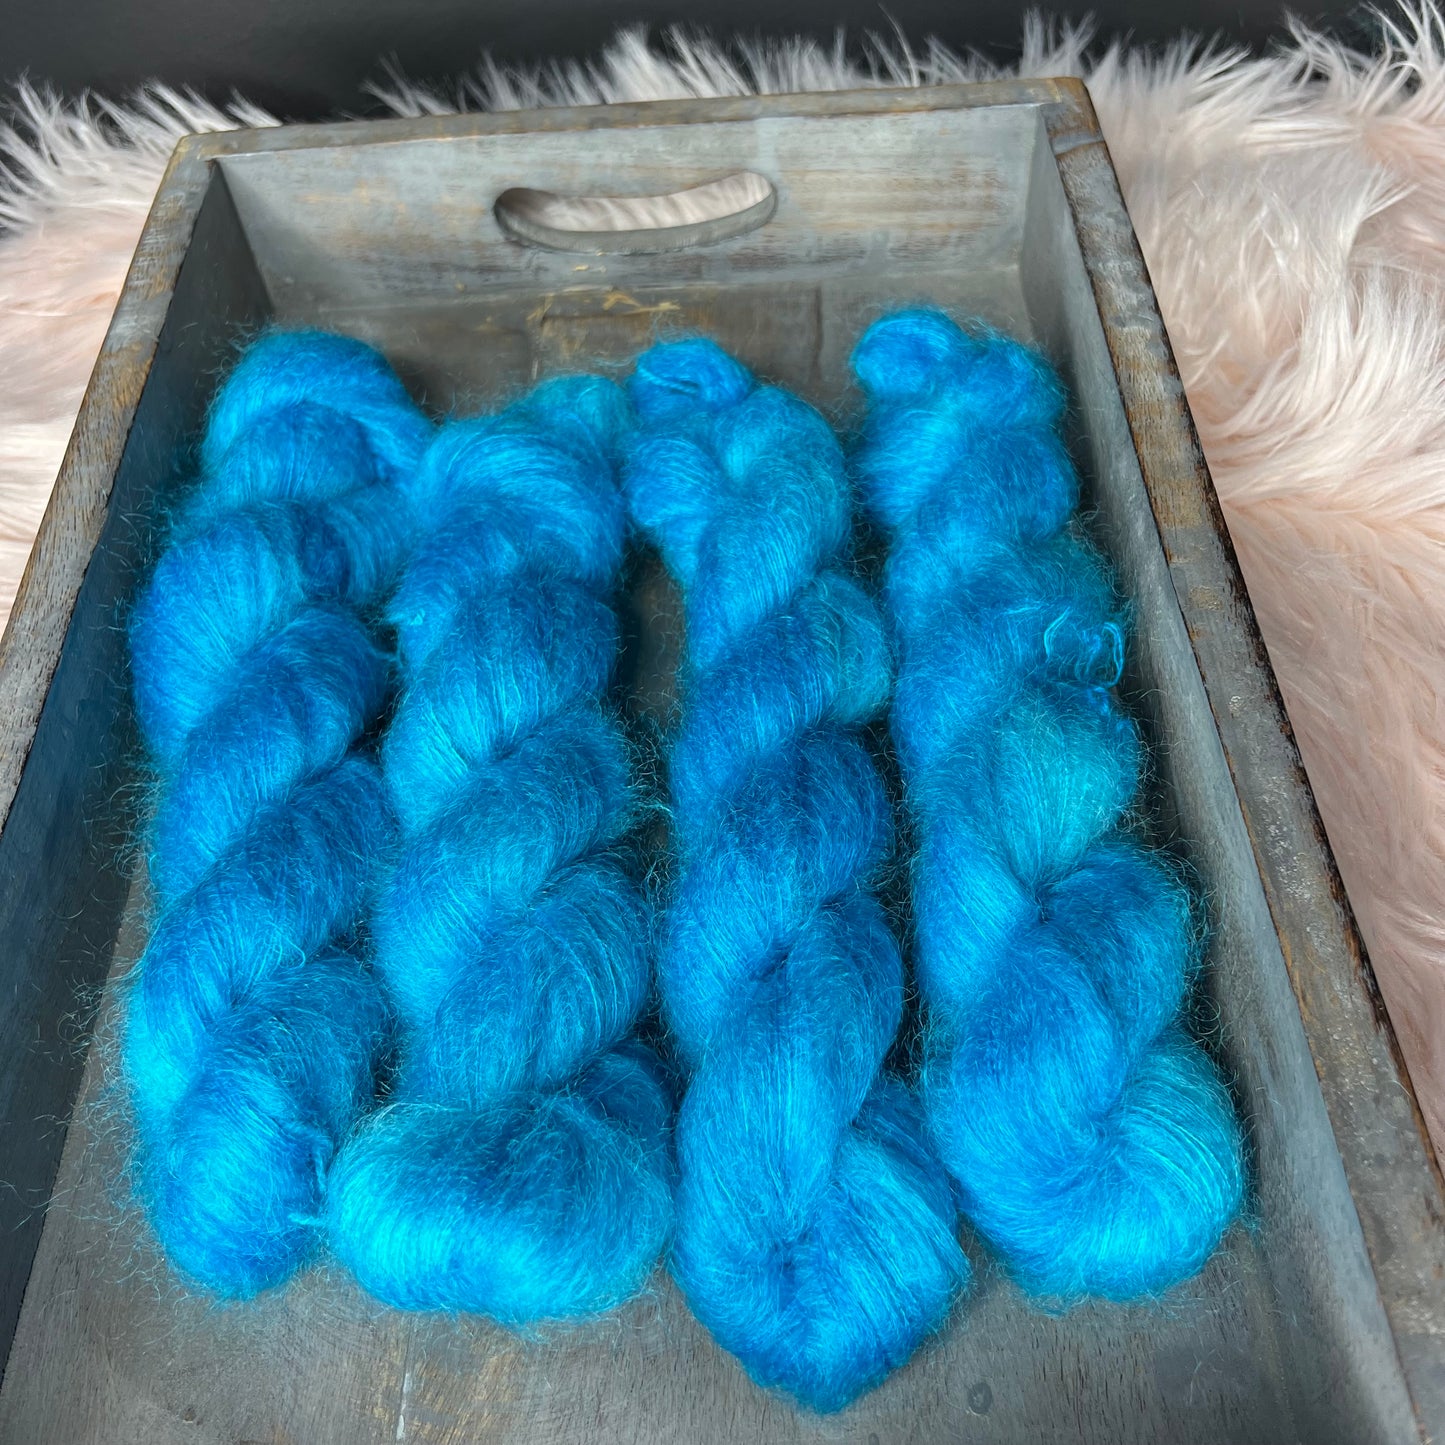 Abigail Mohair Lace - Tidal Luster